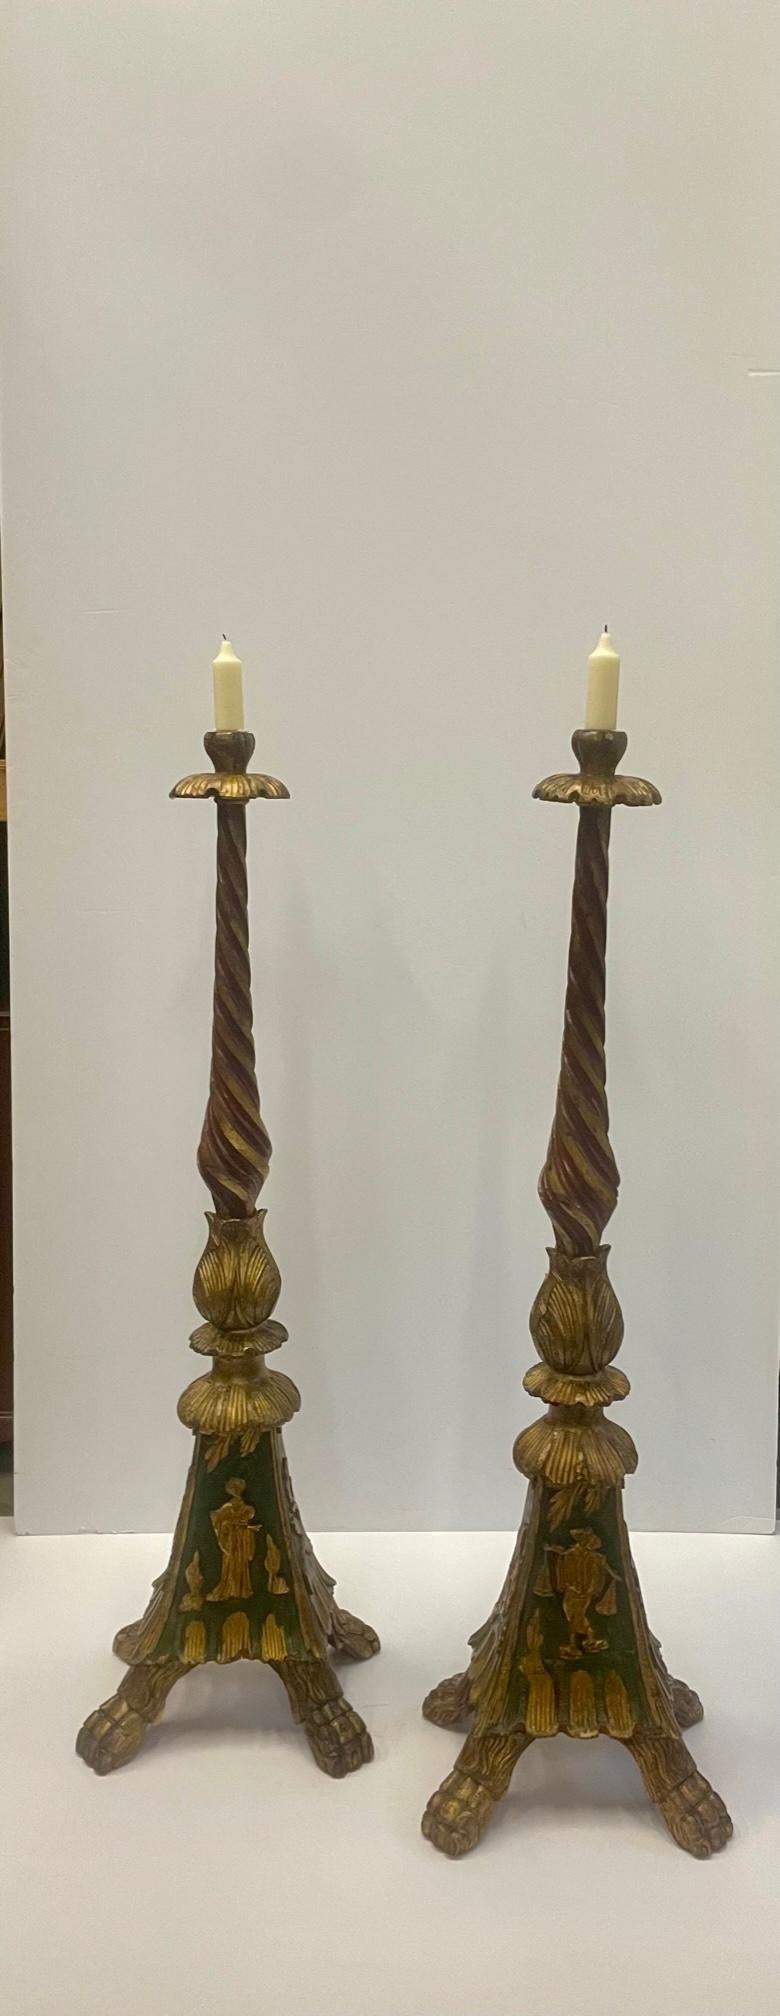 Impressive in scale, beautiful carved wood candlesticks with gilt painted decoration.